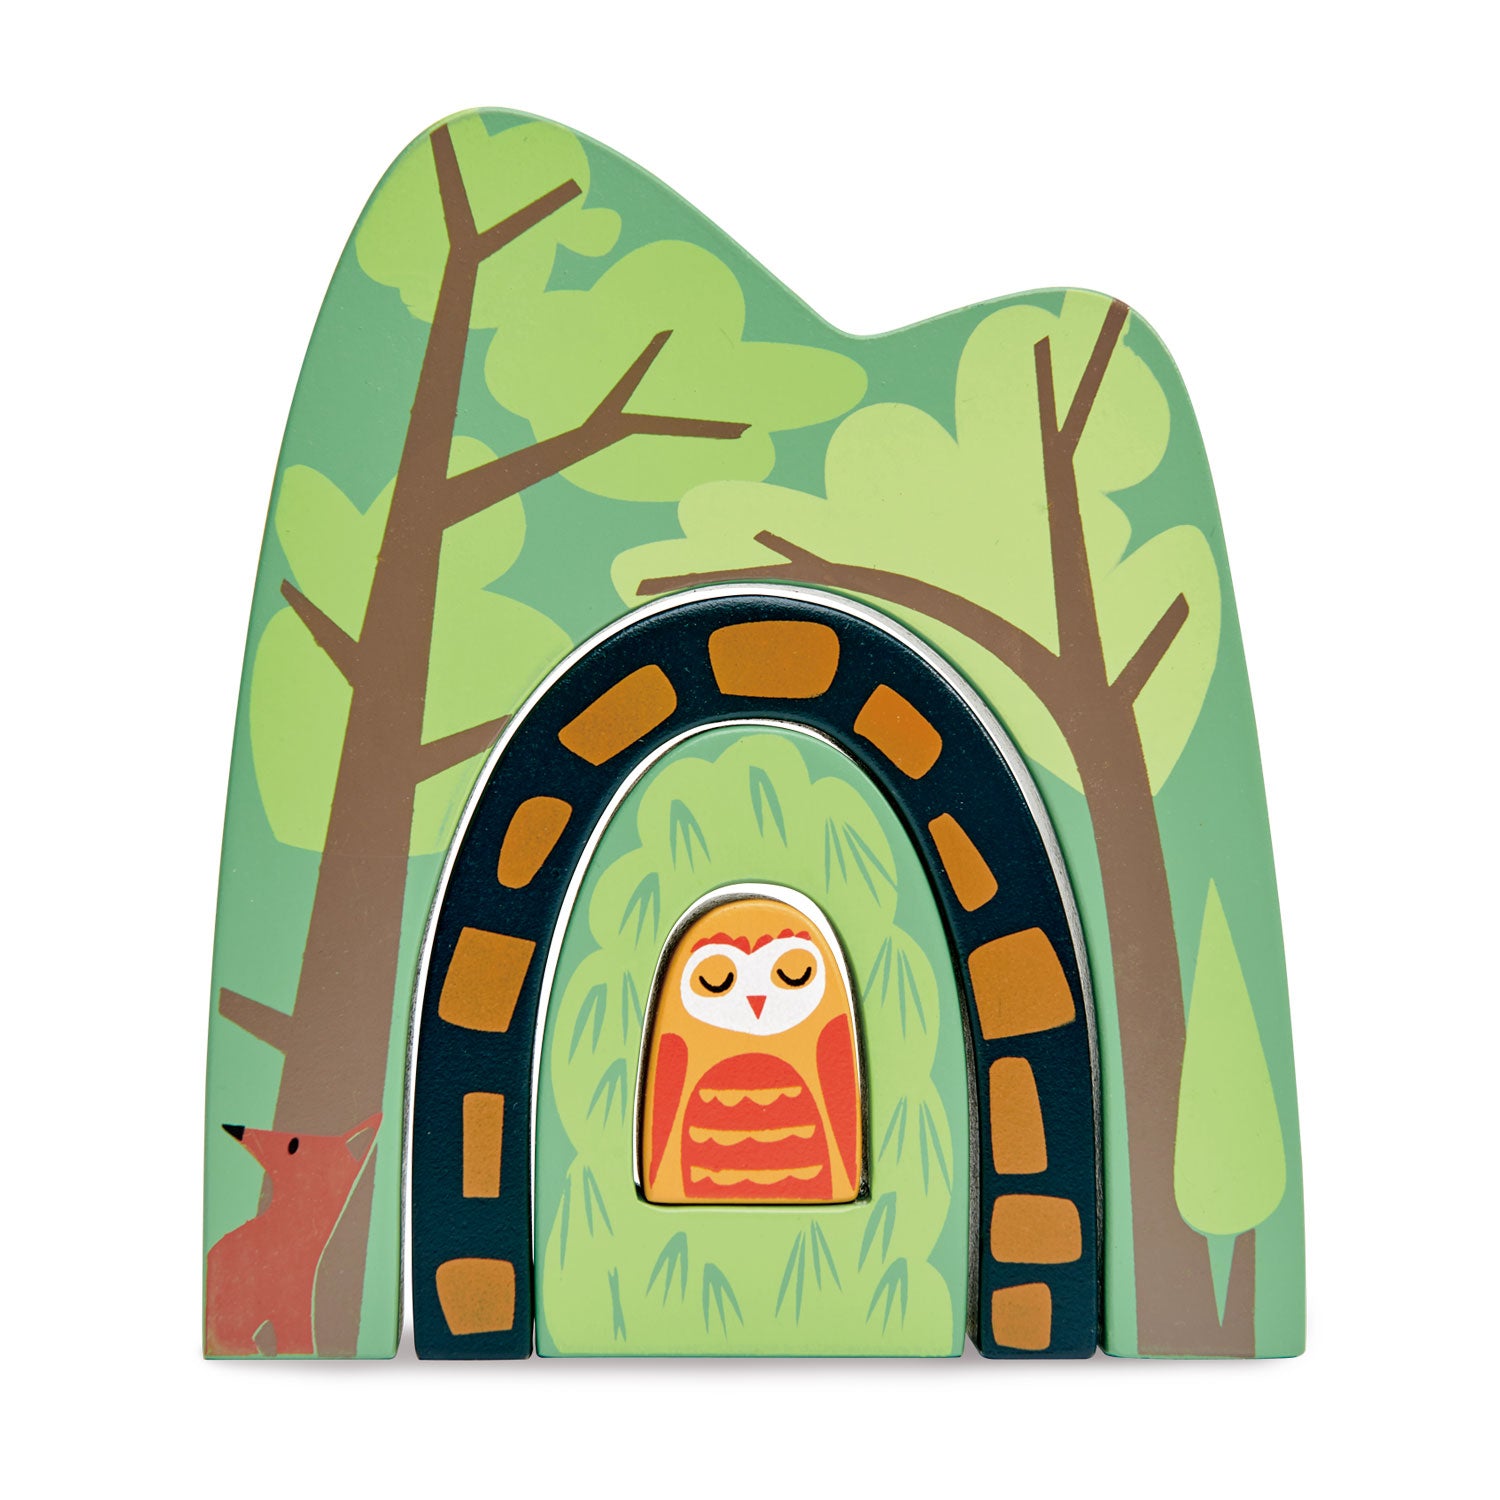 <p>An accessory to the Wild Pines Train Set, these 4 interlocking tunnel style pieces are evocative of the forest, its foliage, a tunnel, and a cute little owl tucked away in amongst the branches.</p>
<p>Age range: 3 Years And Older  </p>
<p>Product size: 5.79 x 0.98 x 6.50”  </p>
<p> Weight: 0.7 lbs</p>
